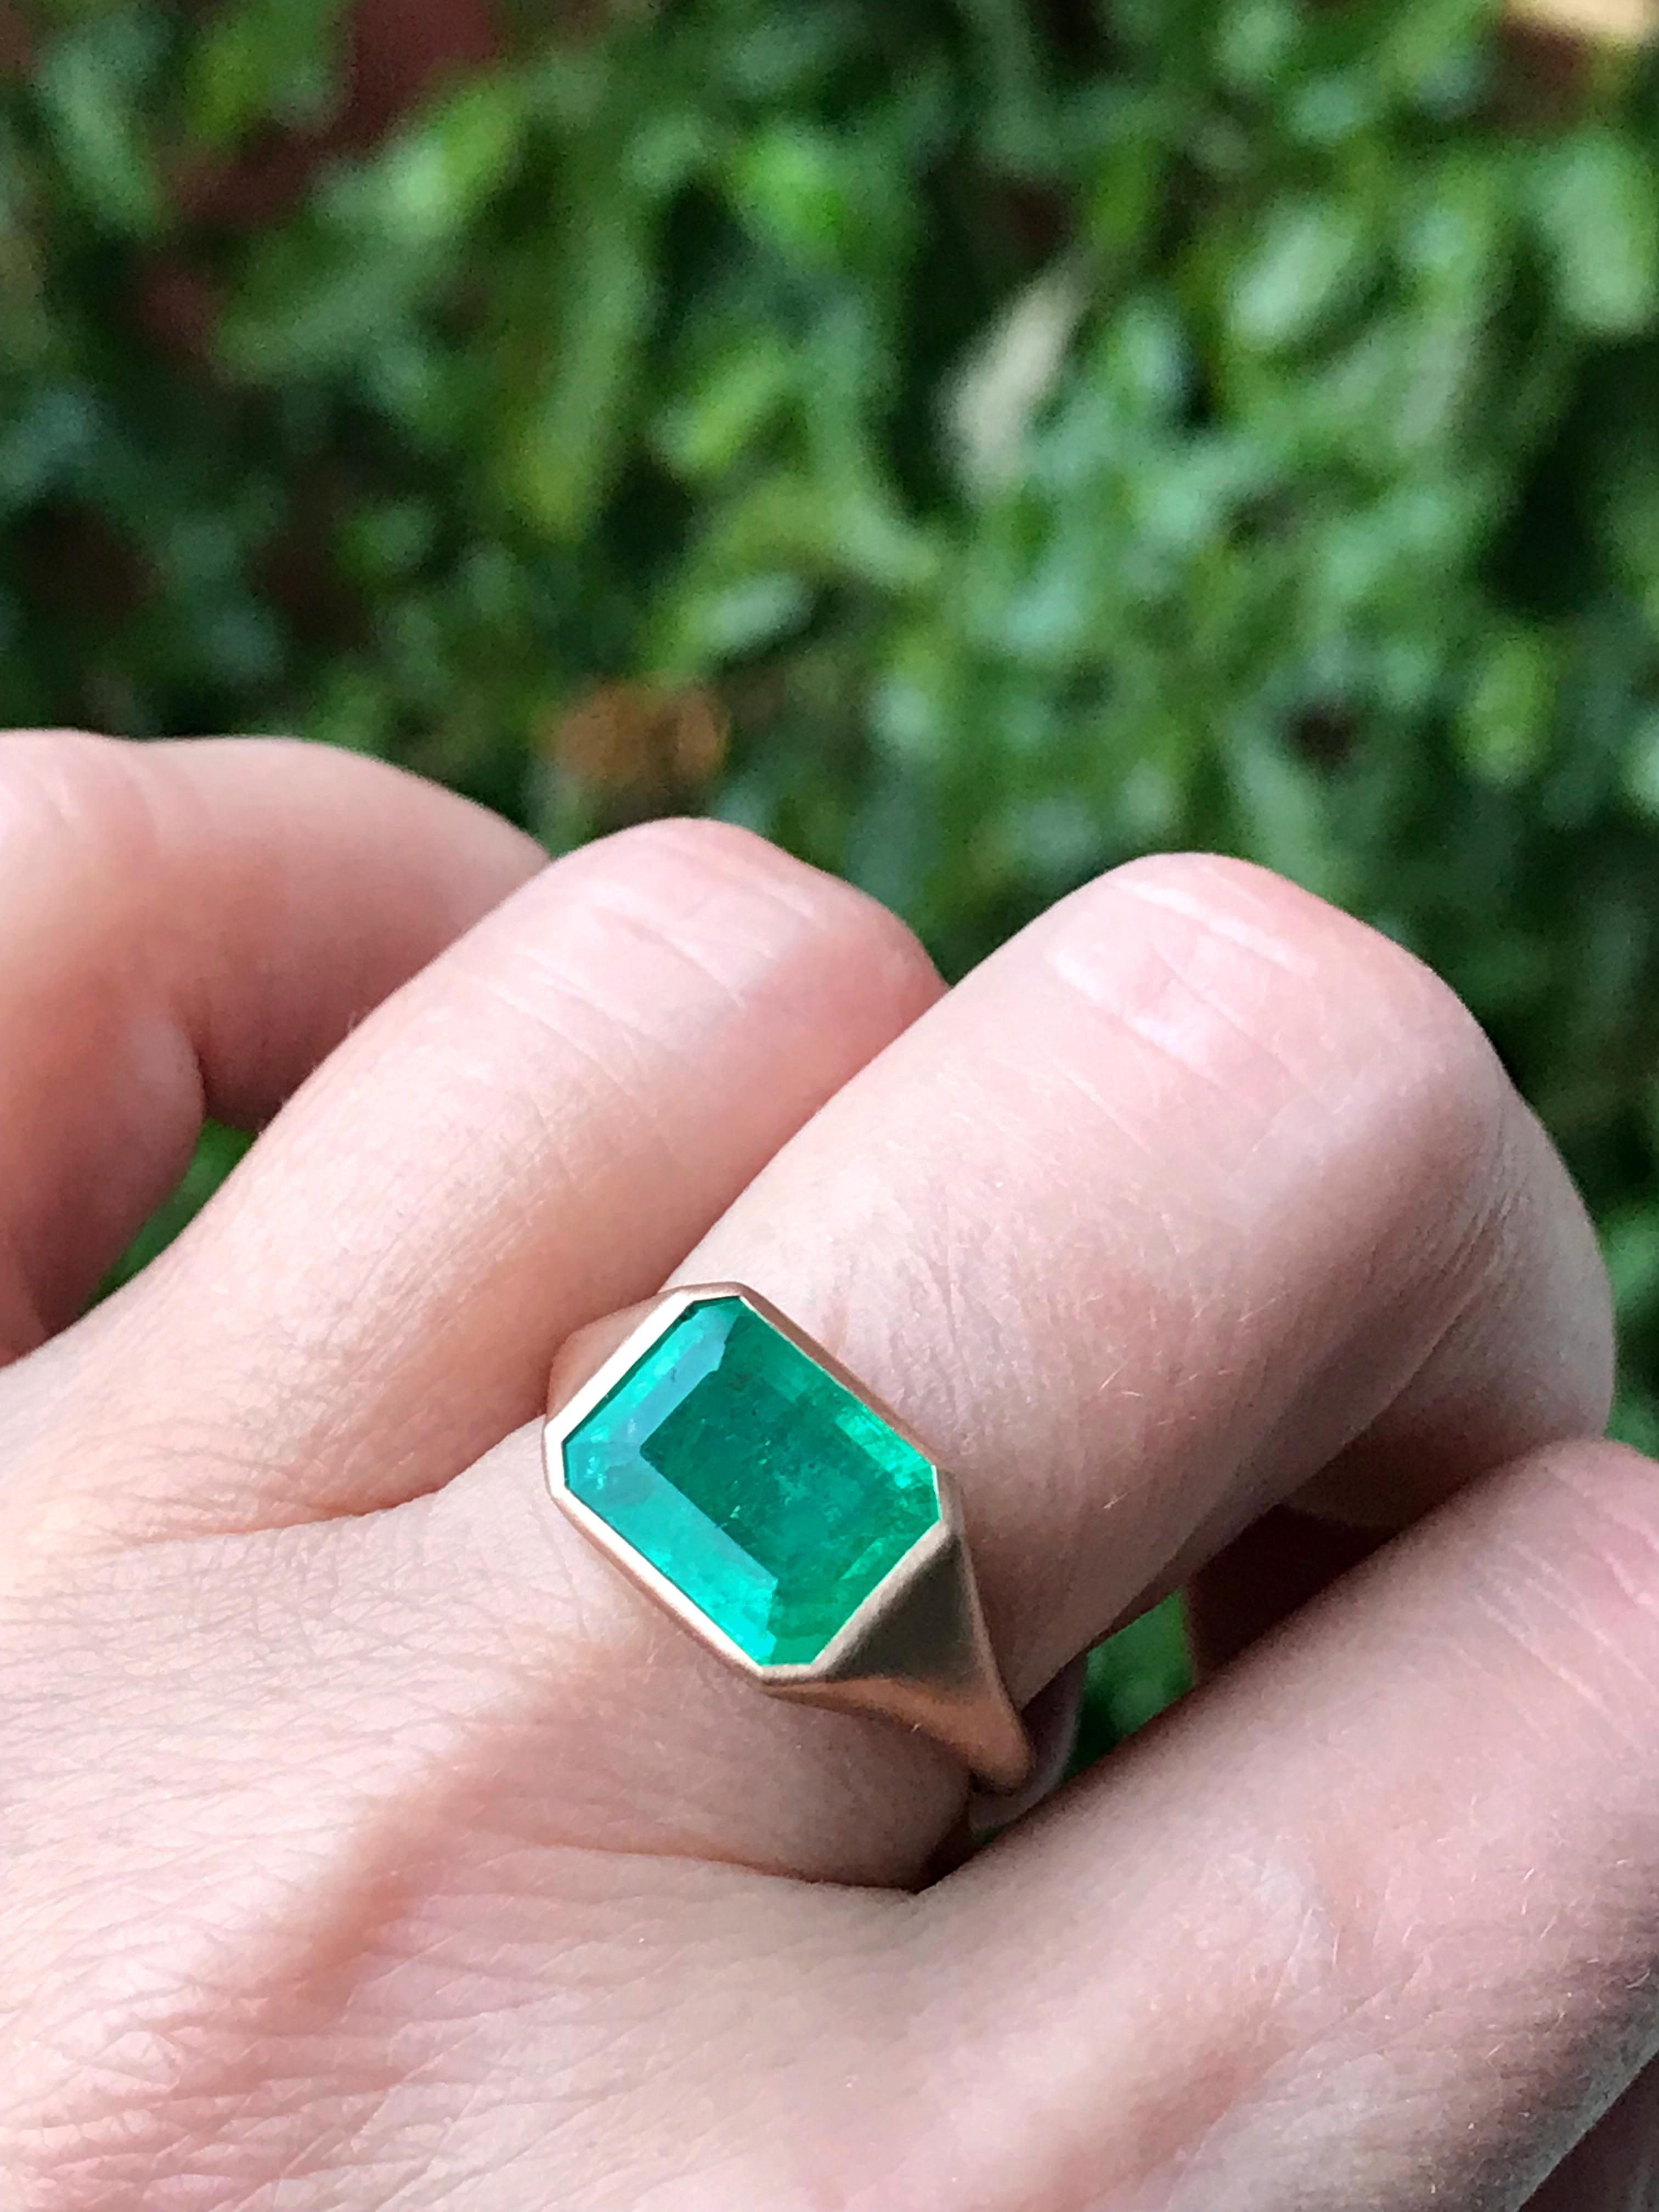 Dalben design One of a Kind 18k rose gold matte finishing ring with a 3,25 carat bezel-set emerald cut emerald. 
Ring size 7 1/4 USA - EU 55 re-sizable to most finger sizes. 
Bezel stone dimensions :
height 9,2 mm
width 12 mm
The ring has been